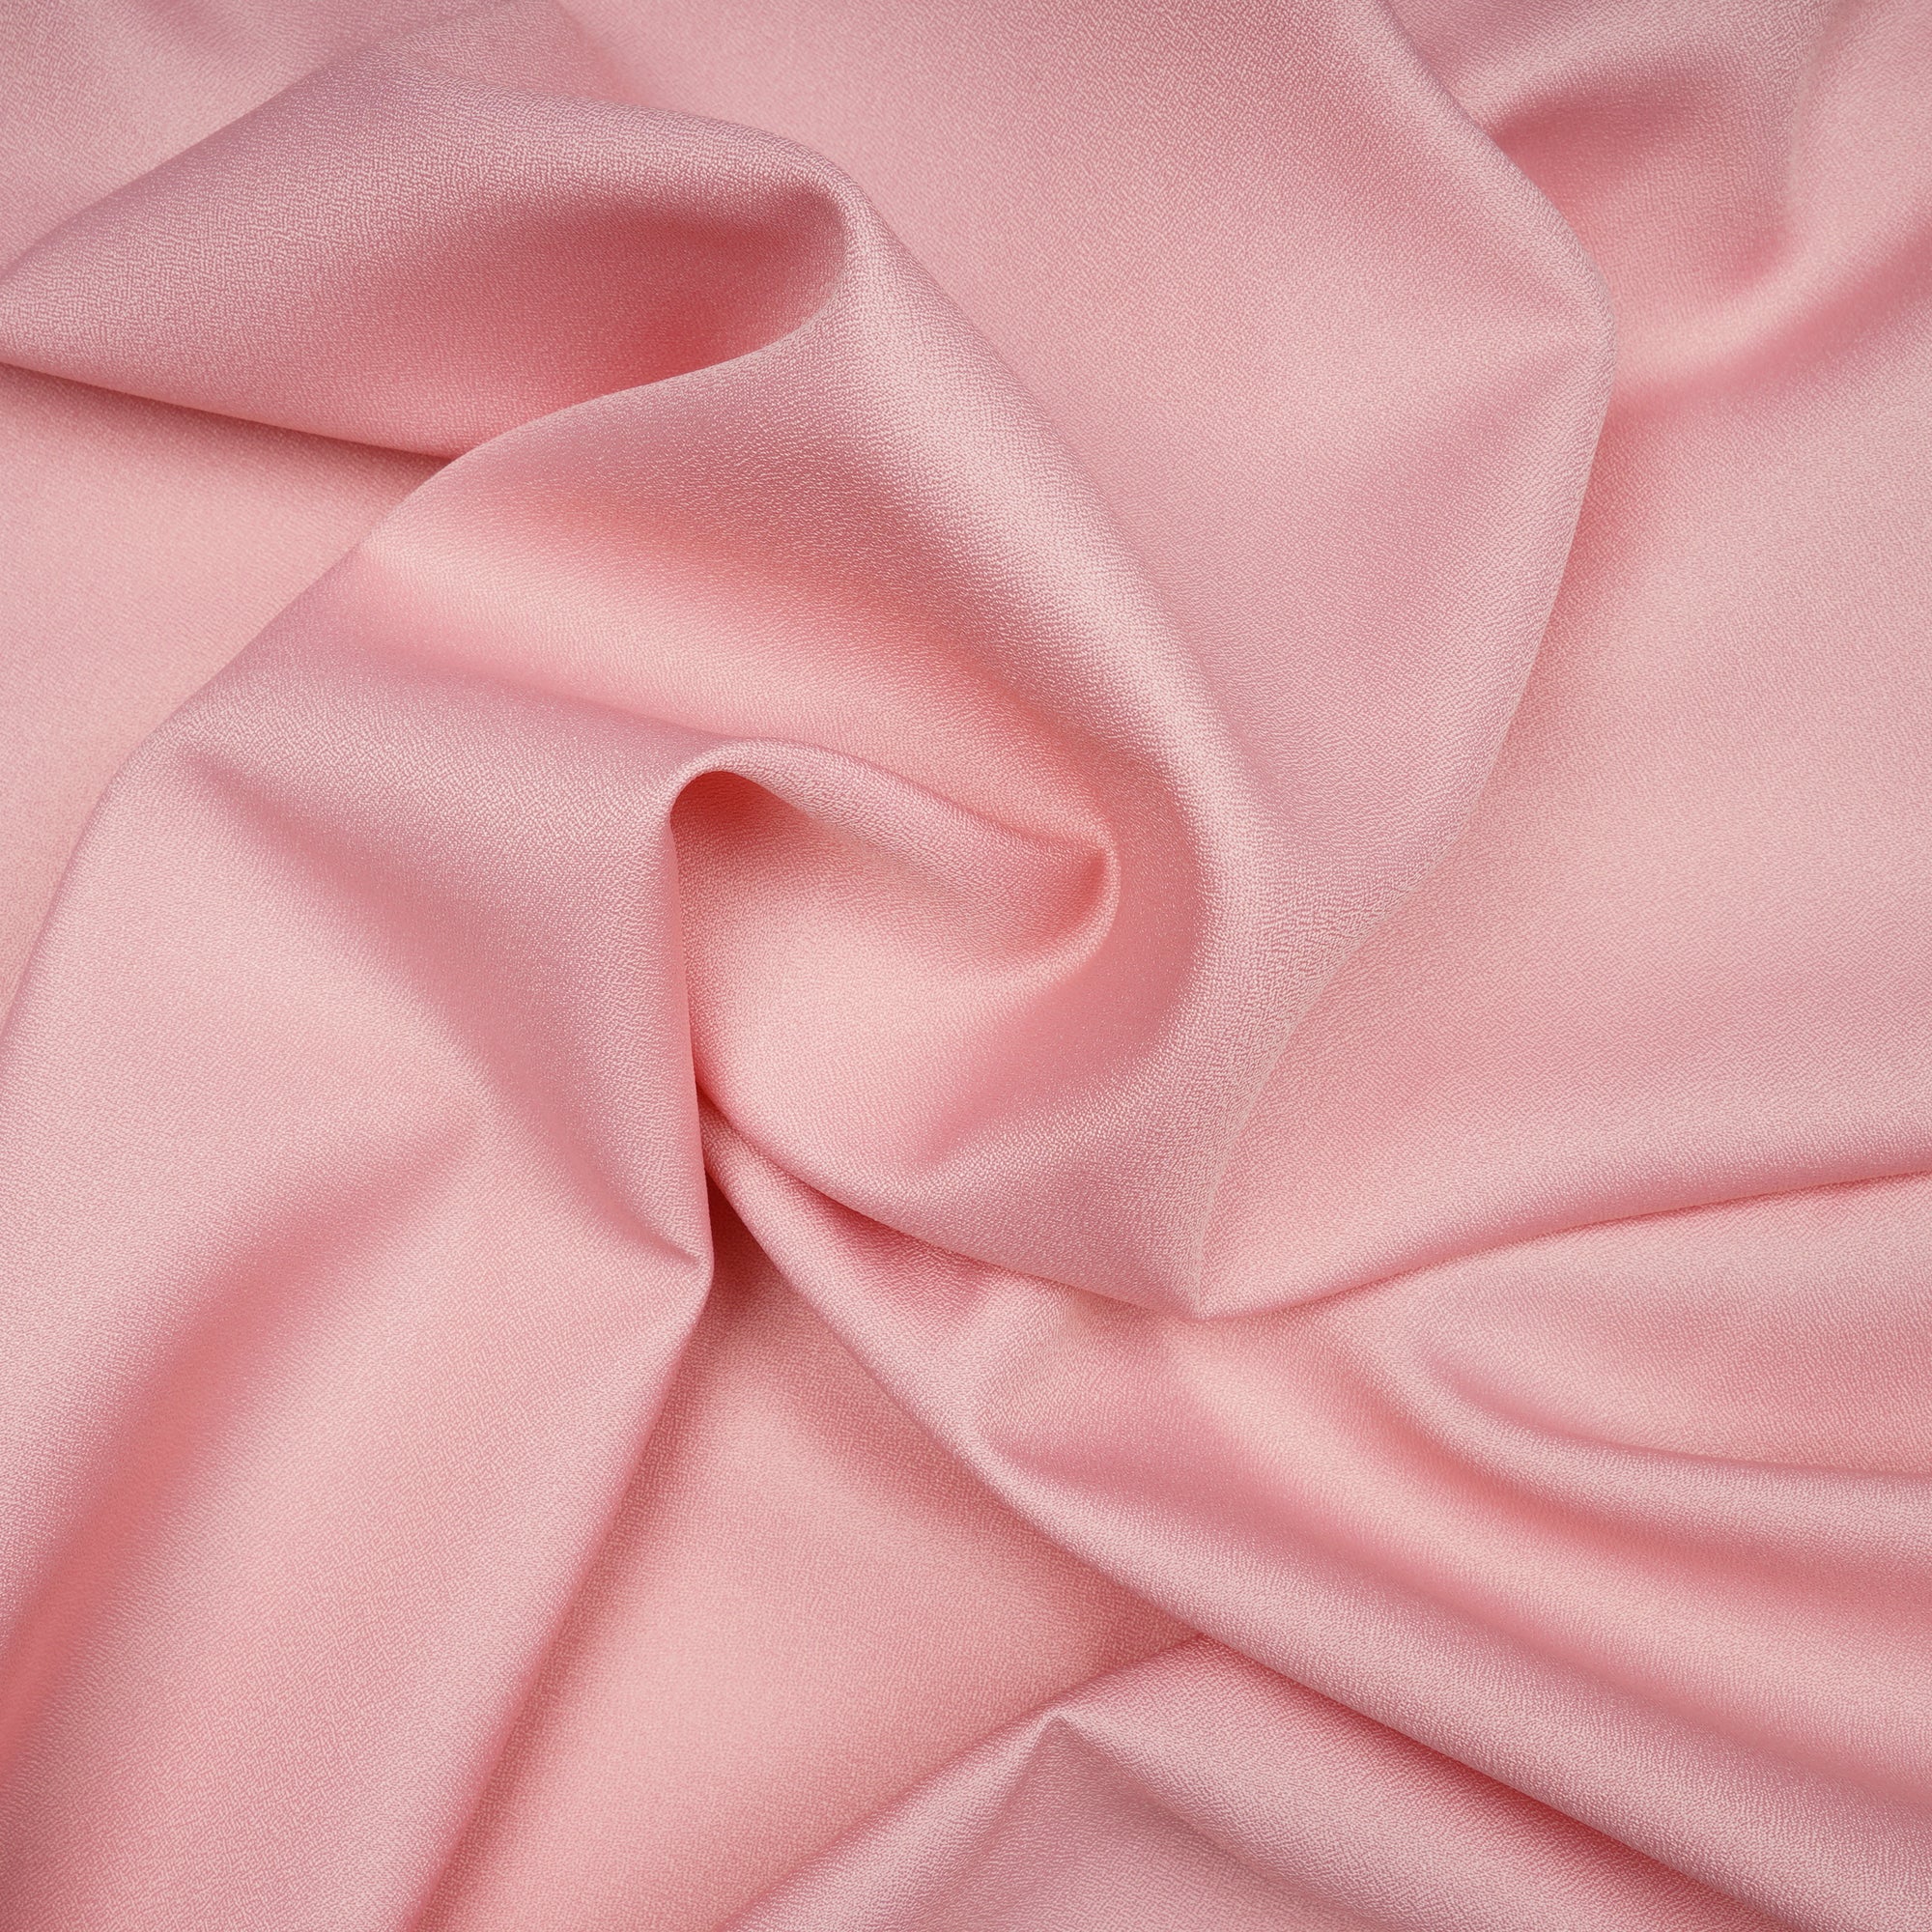 Strawberry Cream Solid Dyed Imported Amazon Moss Crepe Fabric (60" Width)